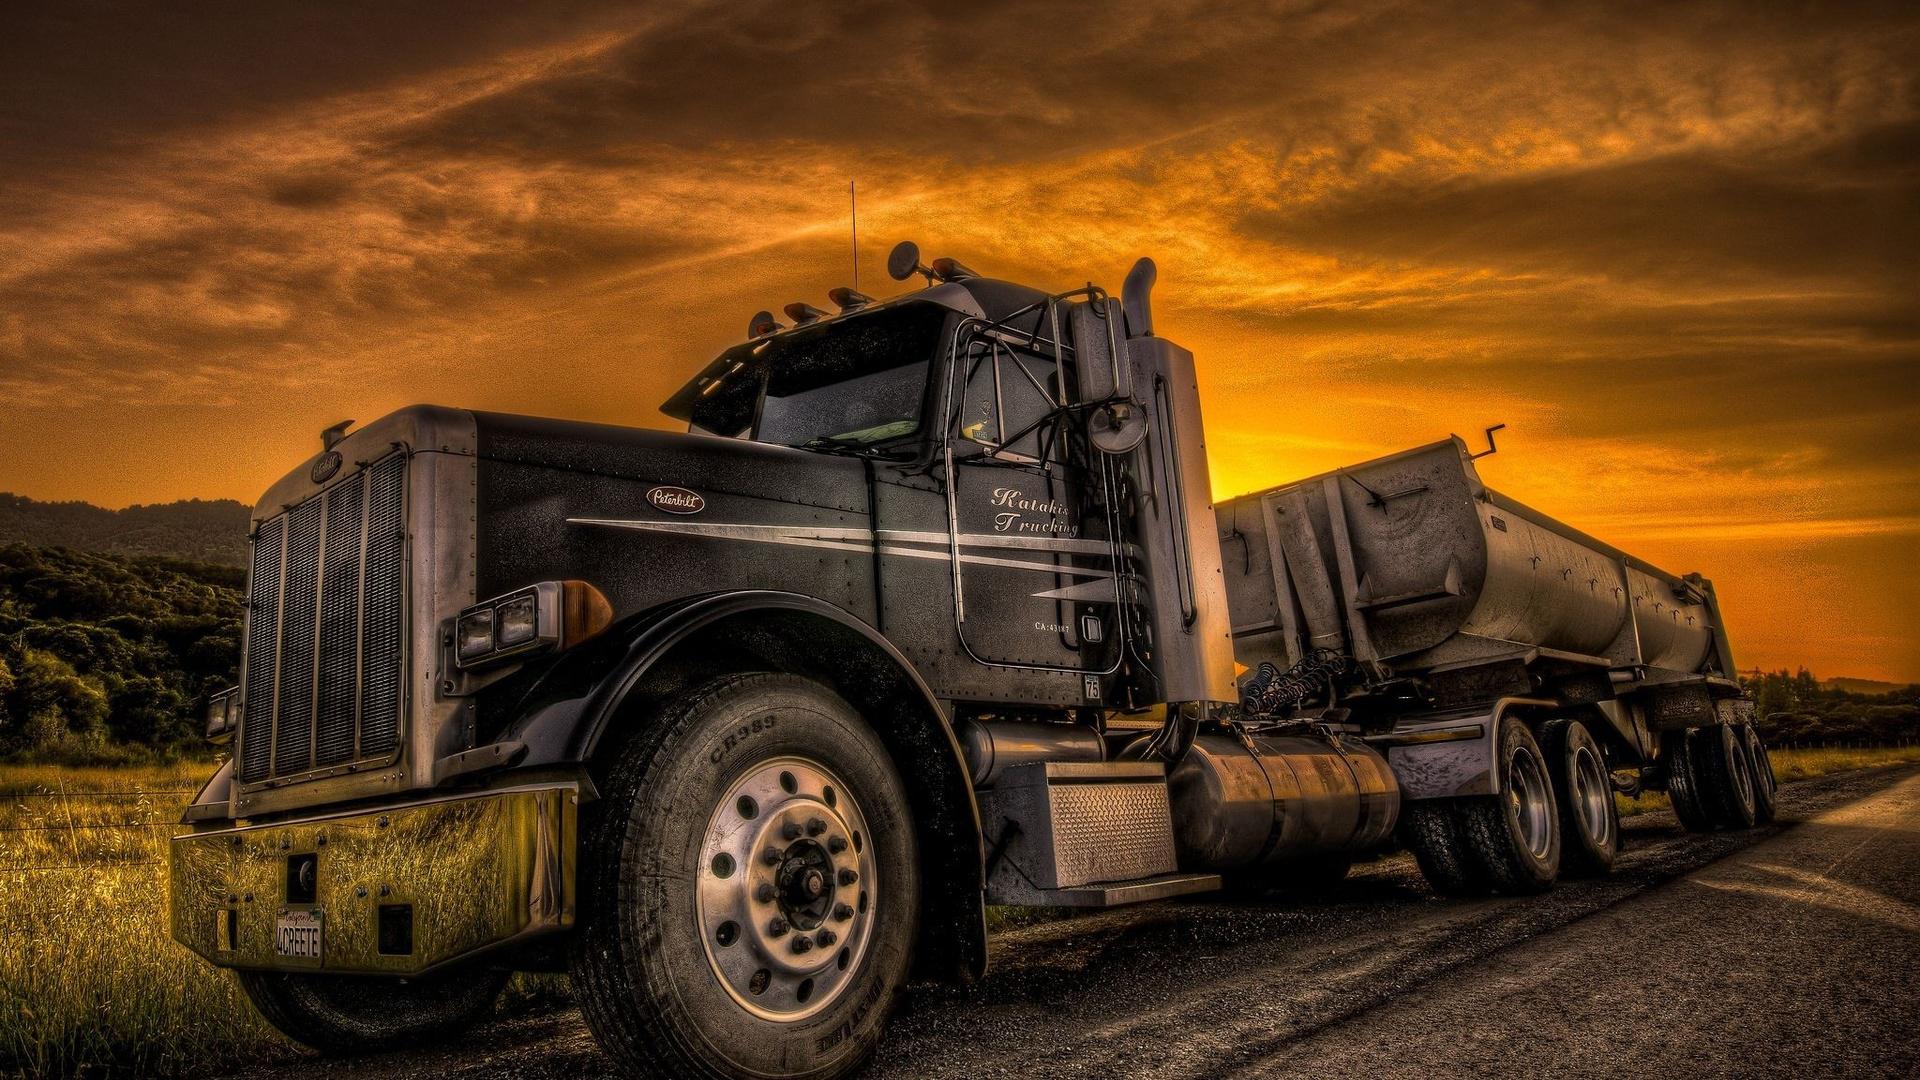 Tractor Trailer On The Side Of Road HDr Wallpaper HD